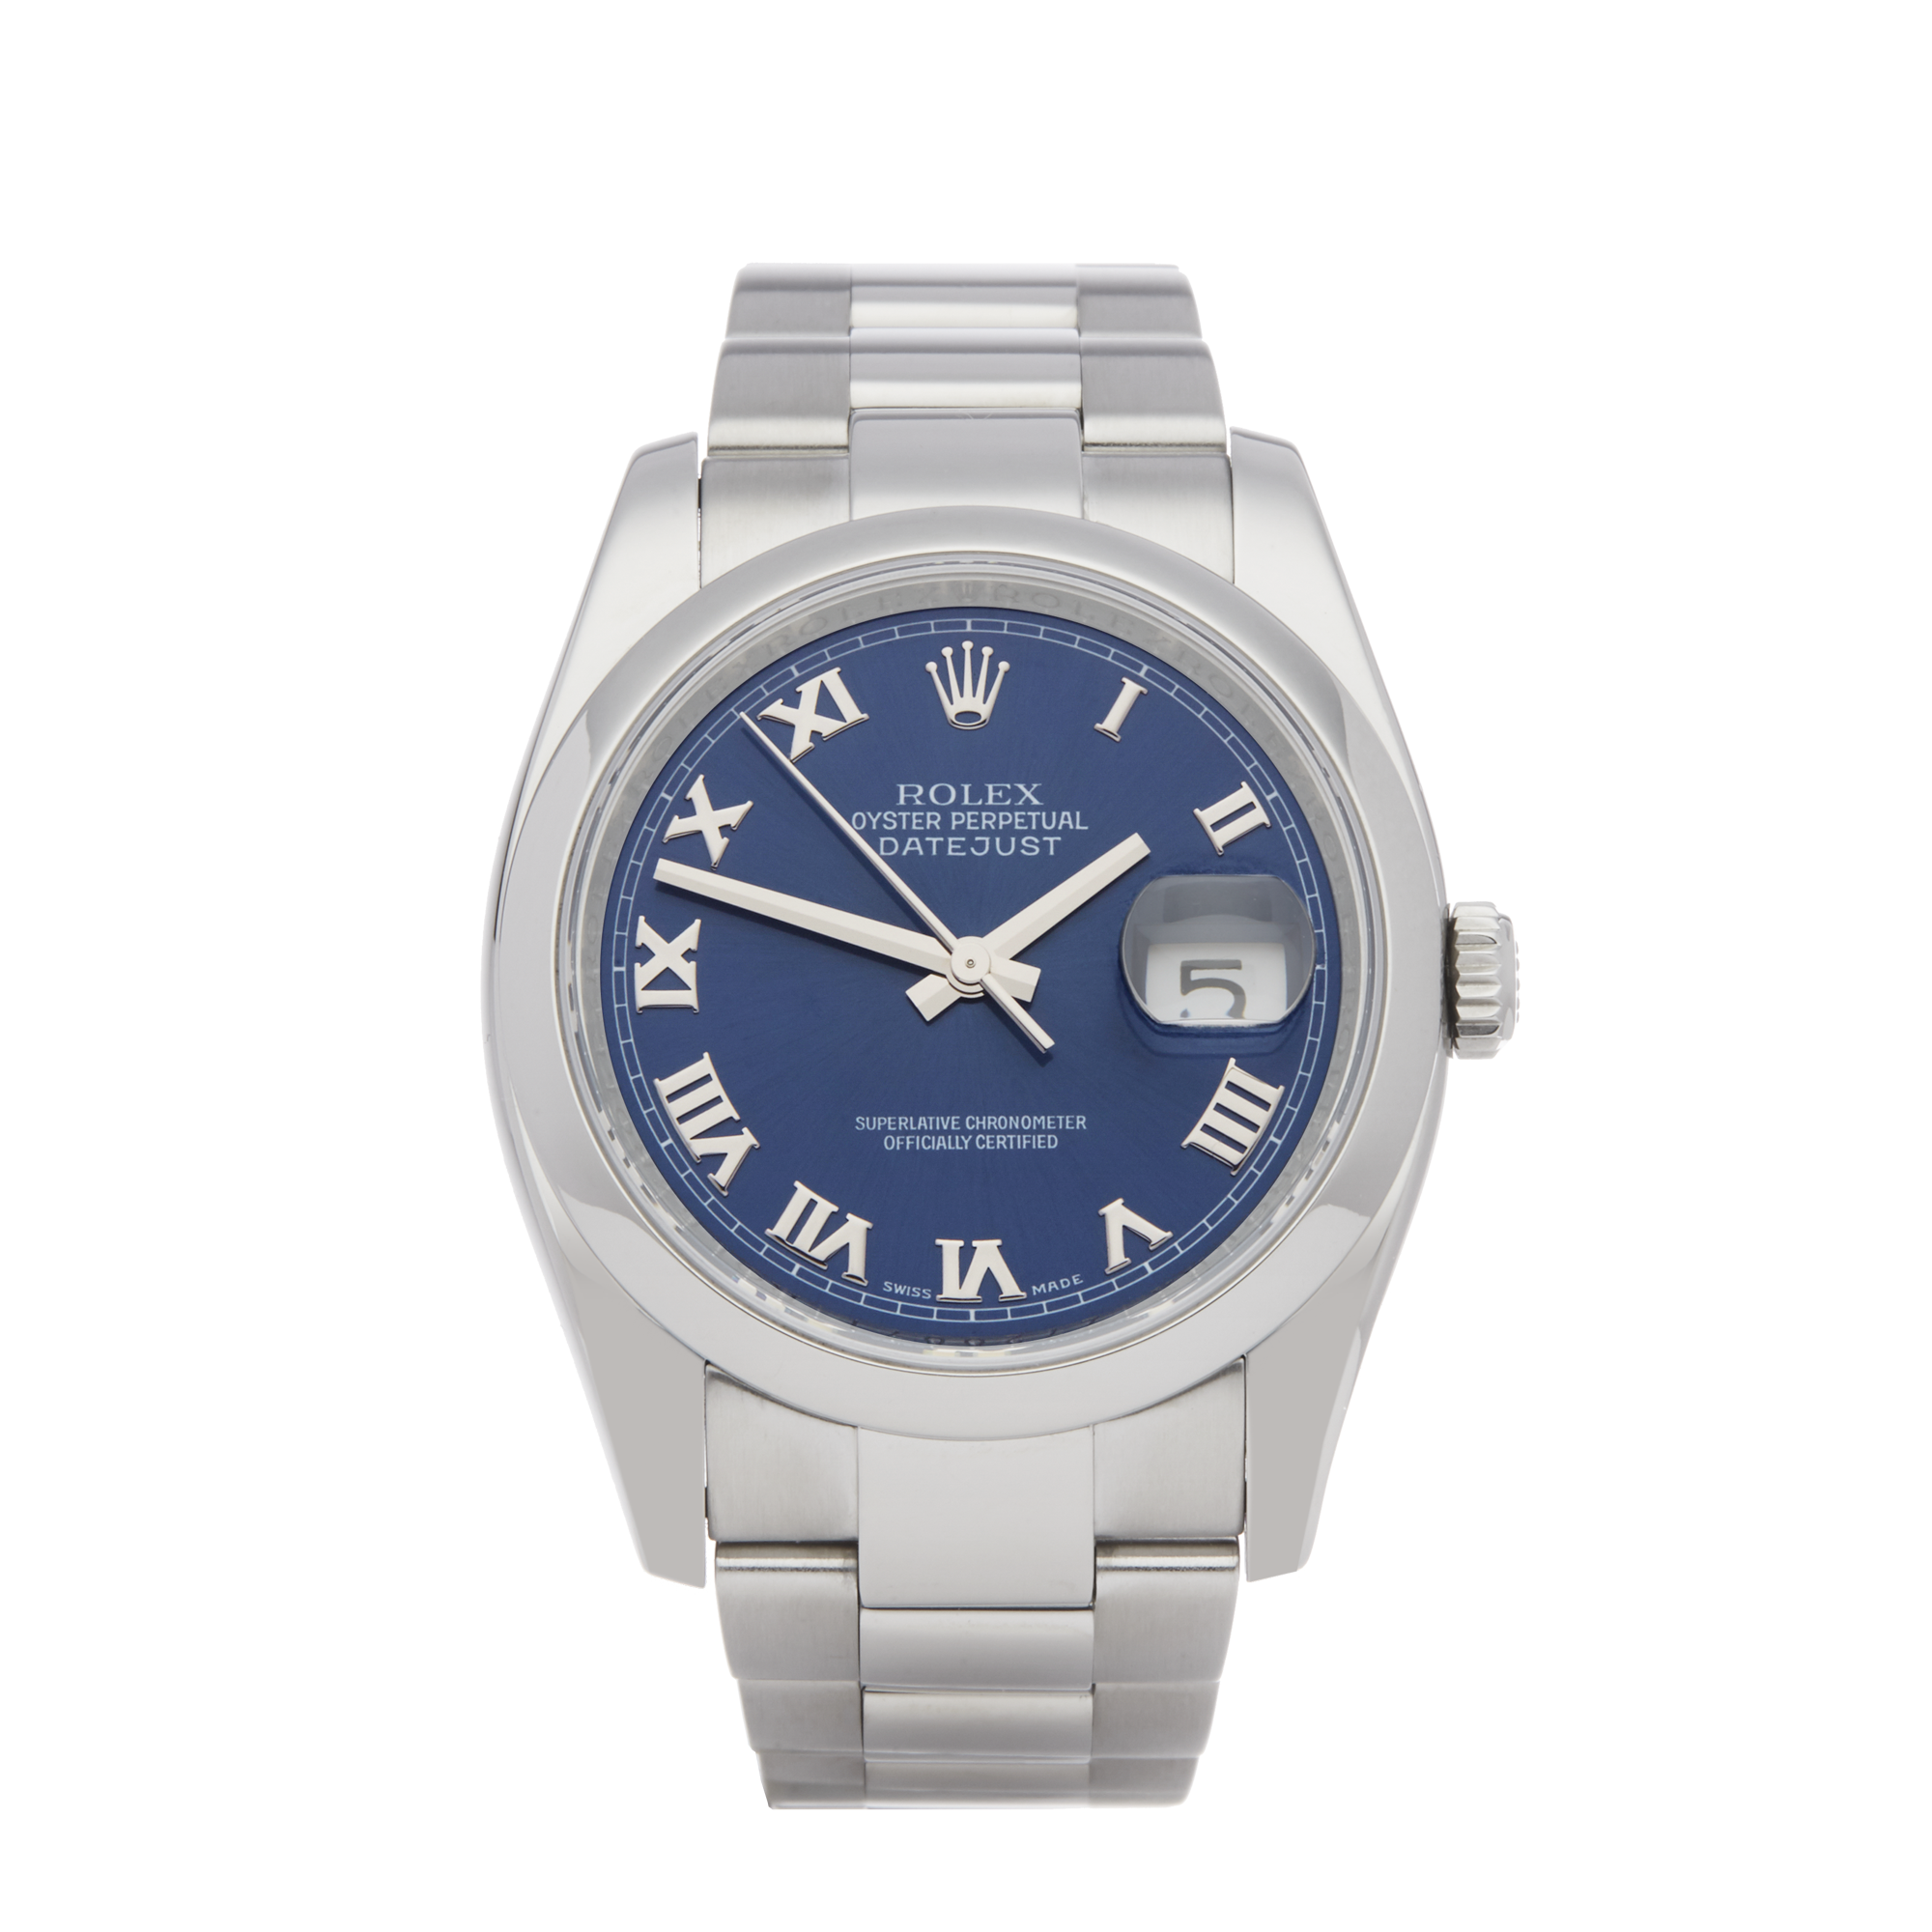 Rolex Datejust 36 116200 Men Stainless Steel Watch - Image 2 of 9